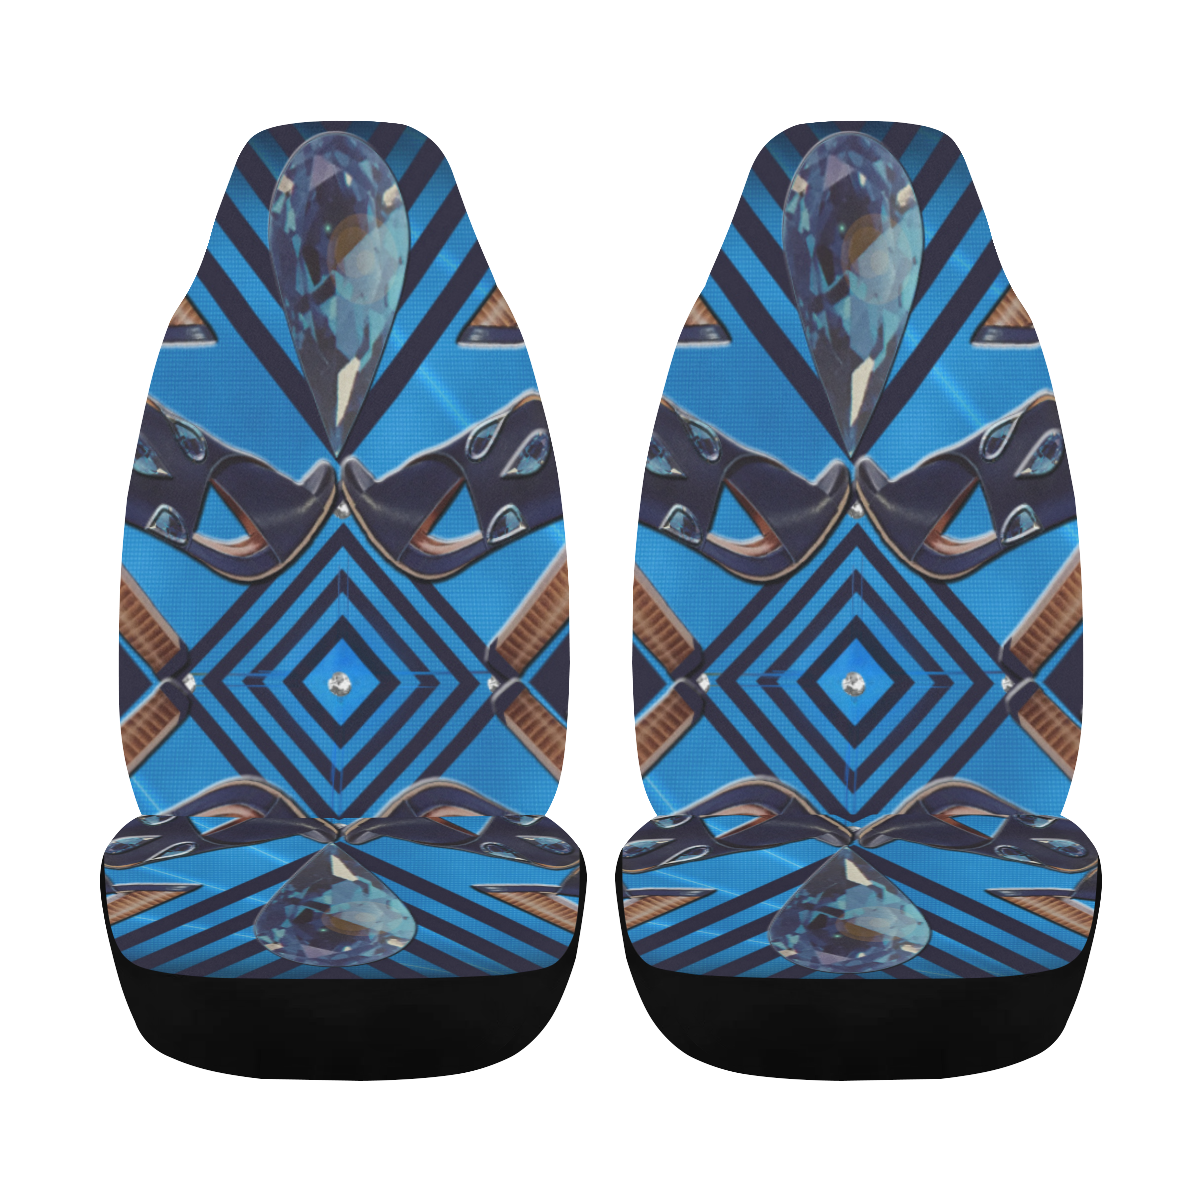 Sapphire Shoes Car Seat Cover Airbag Compatible (Set of 2)